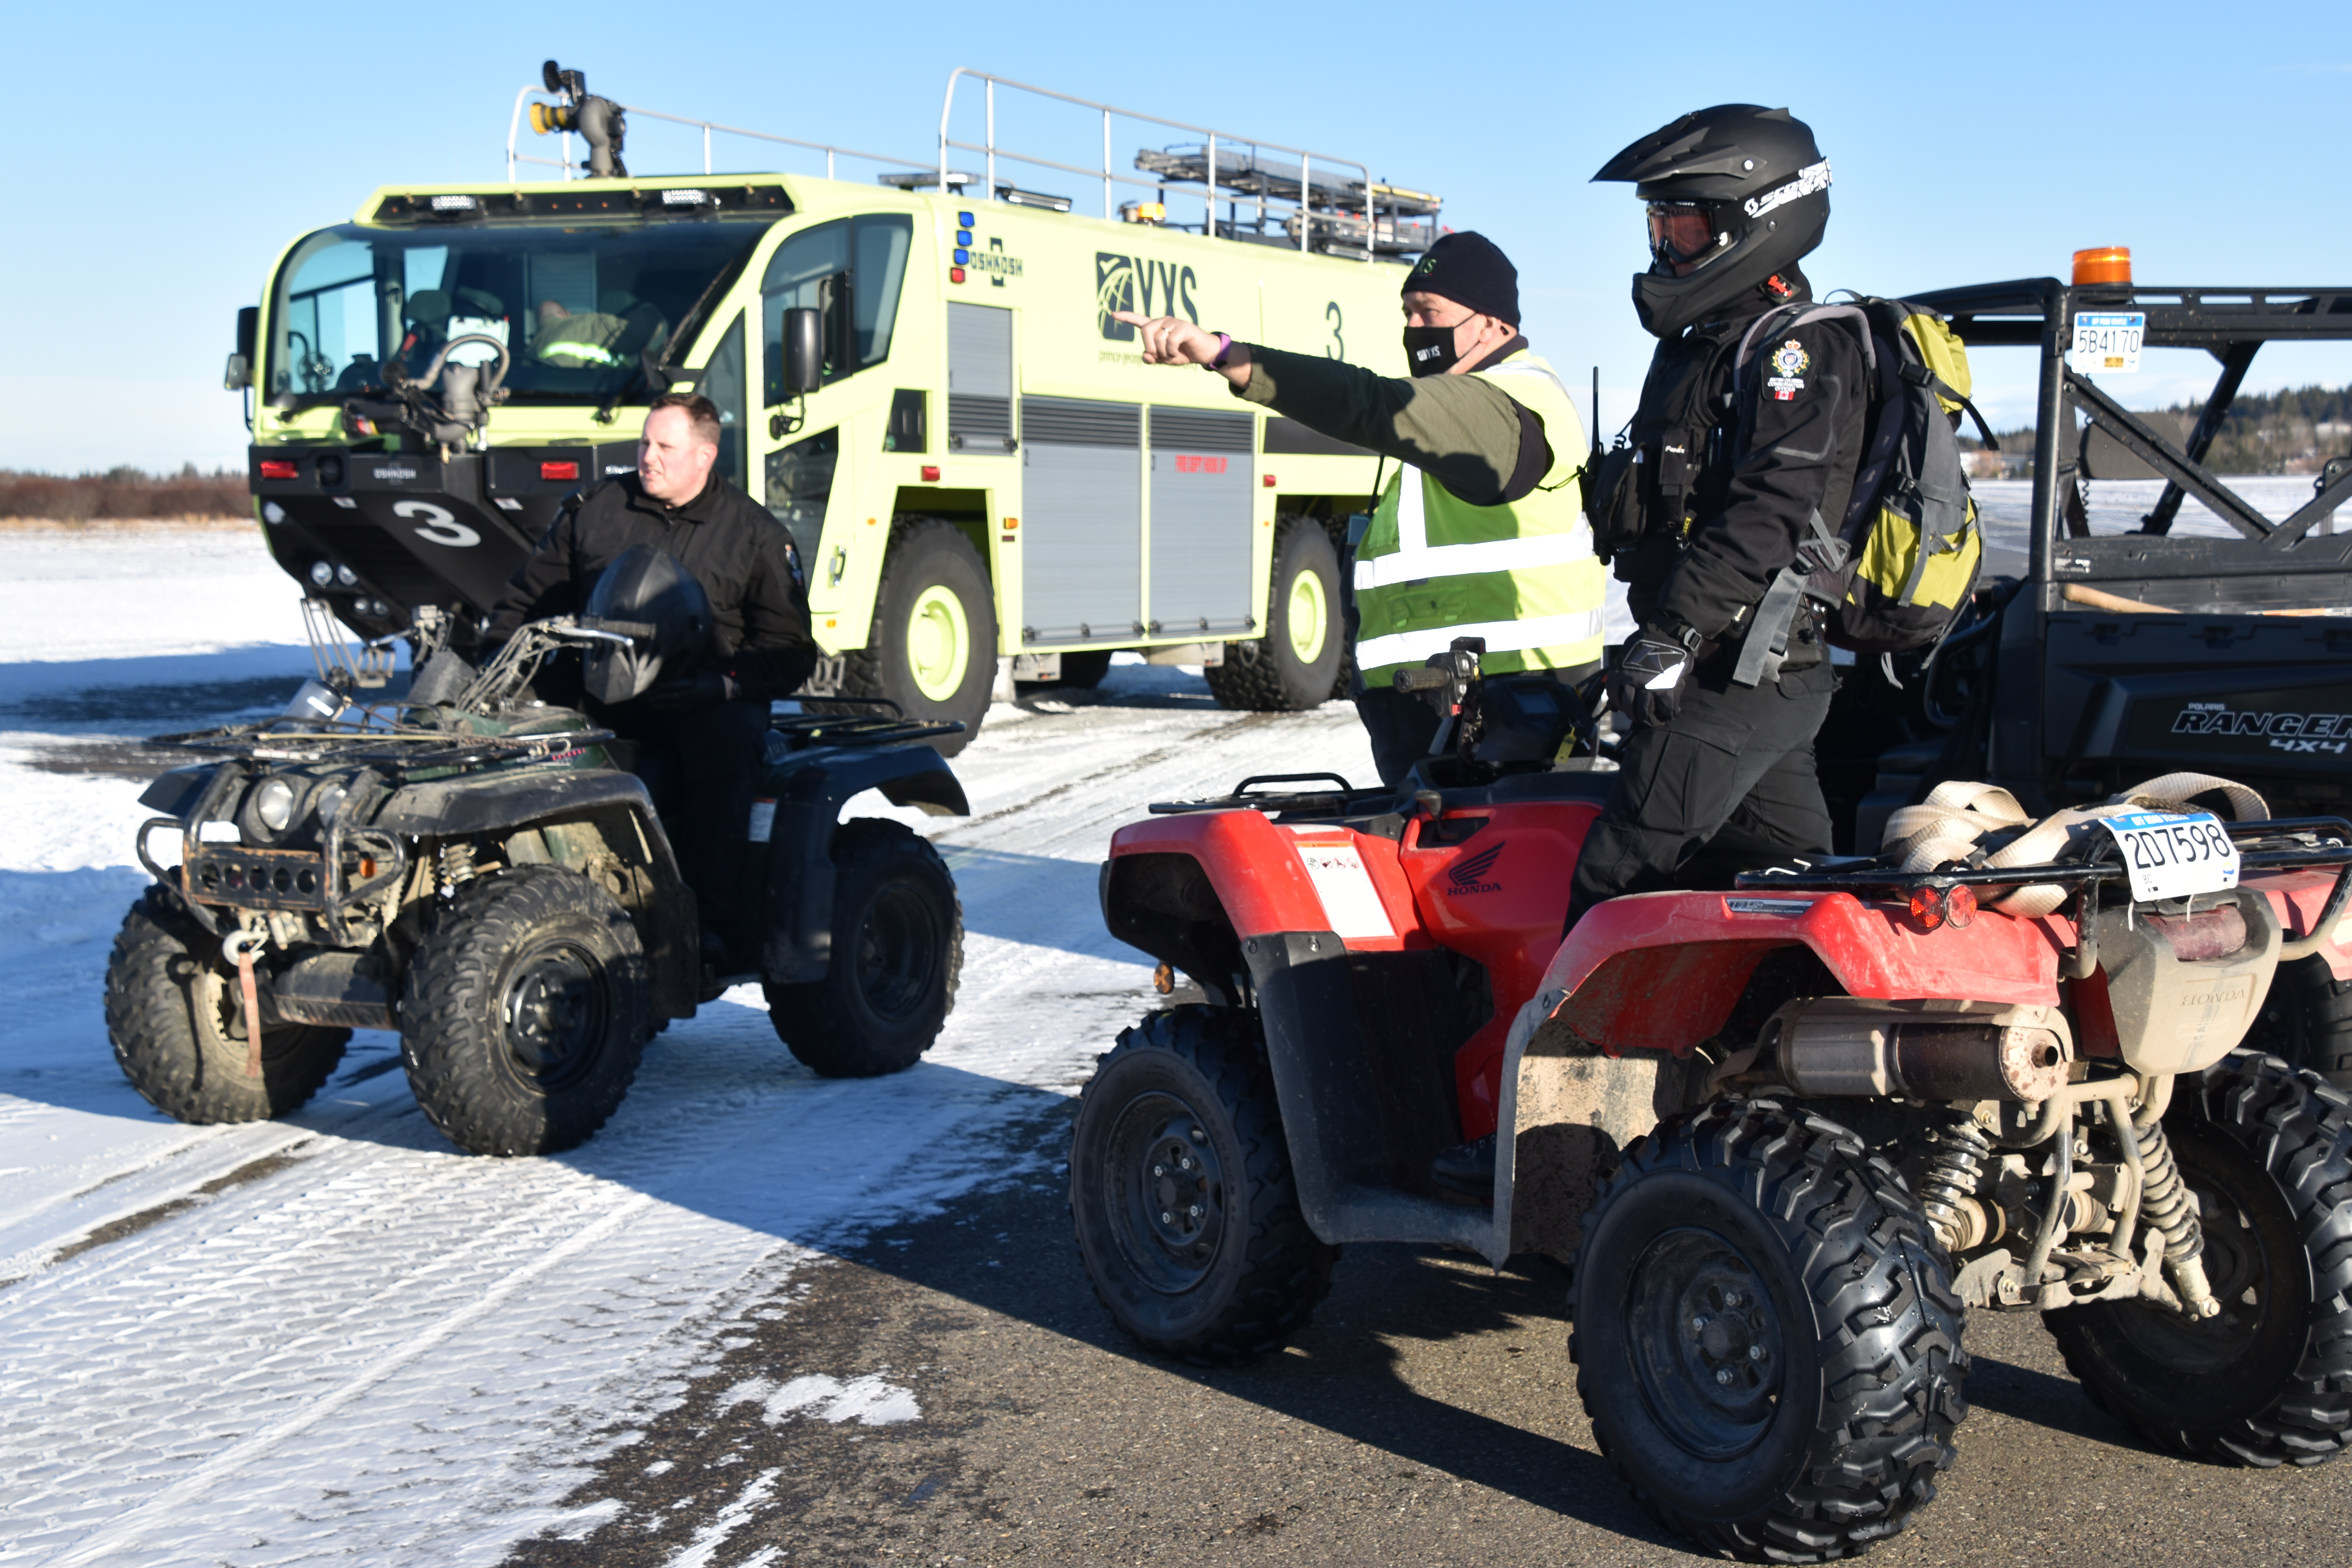 People gather on quads and side-by-sides at the Prince George airport as they prepare to get a moose of the property